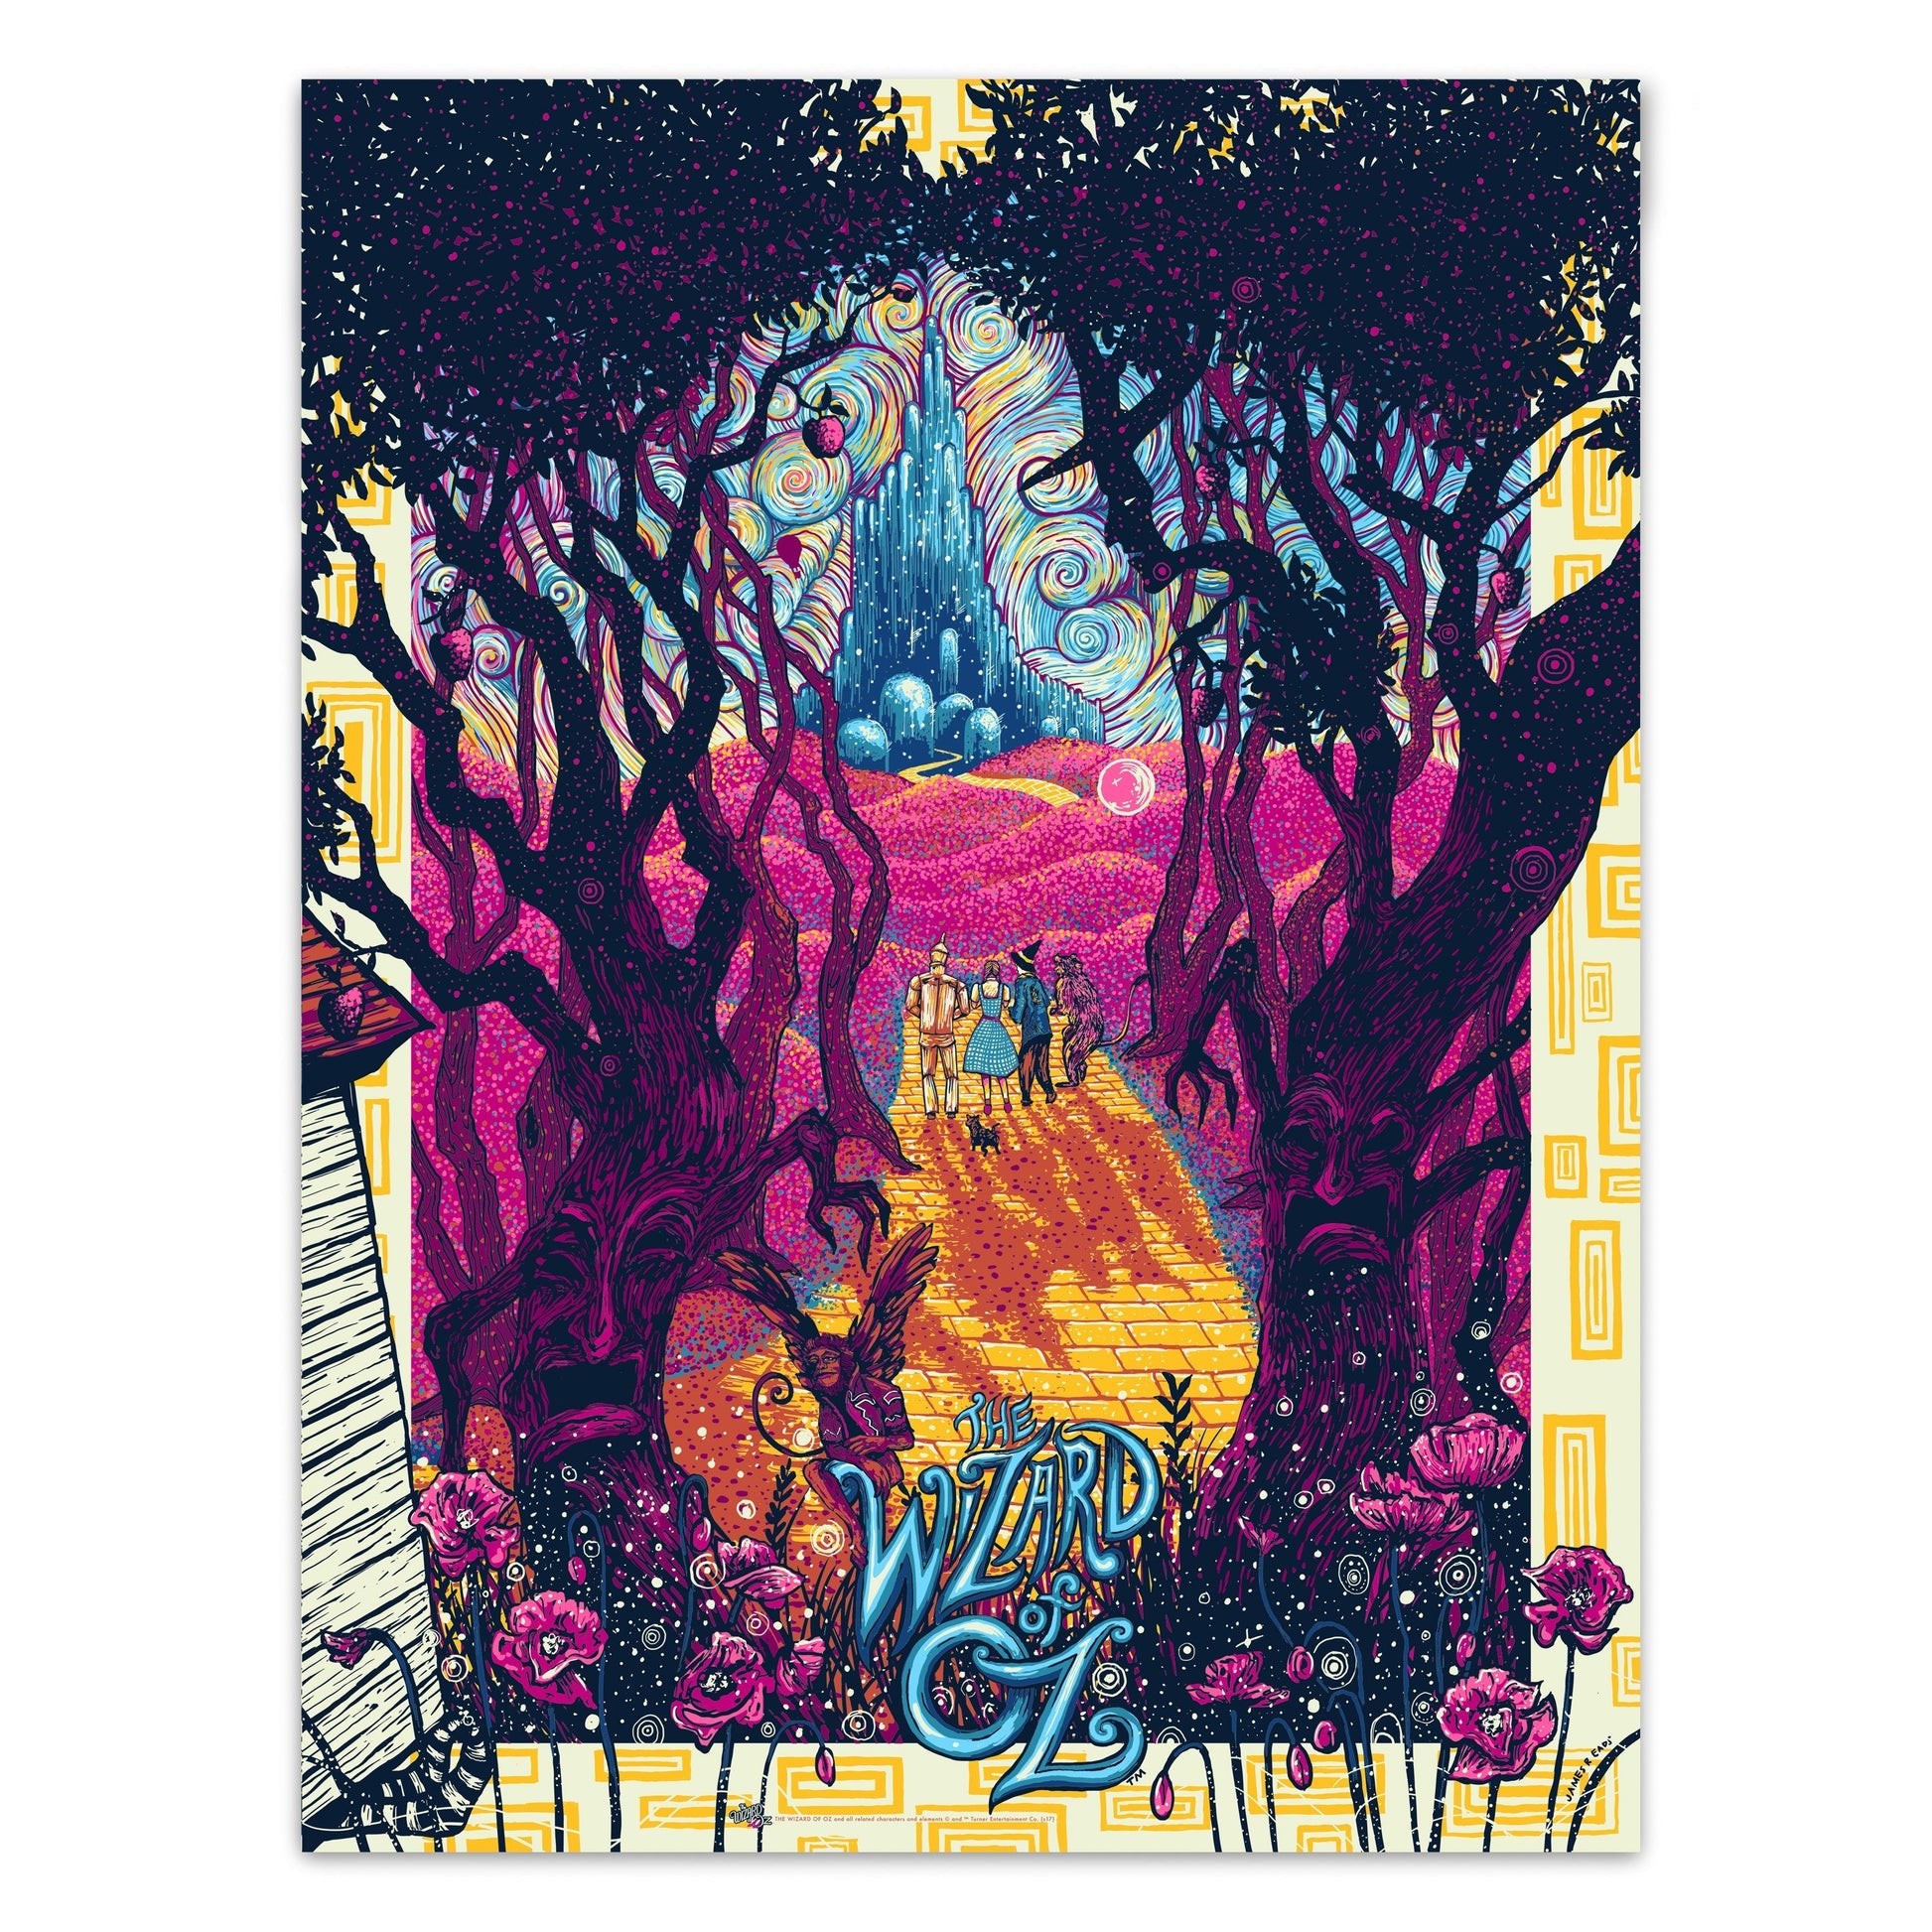 Poppies (Variant AP Edition of 15) Print James R. Eads